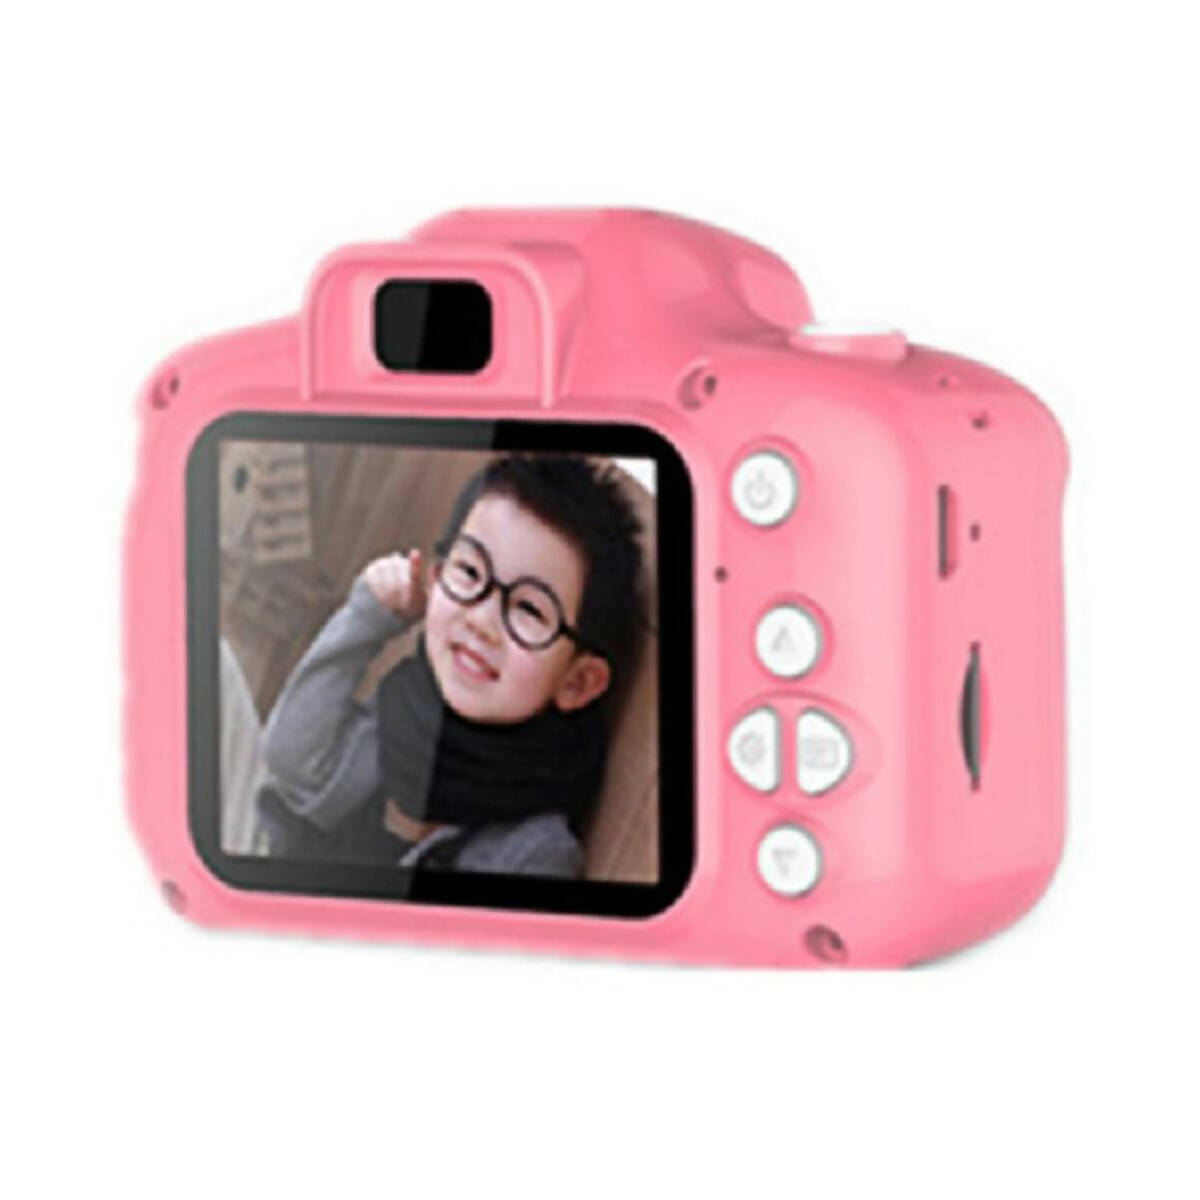 X2 HD mini digital camera can take photos and videos small SLR gift toys Children's camera